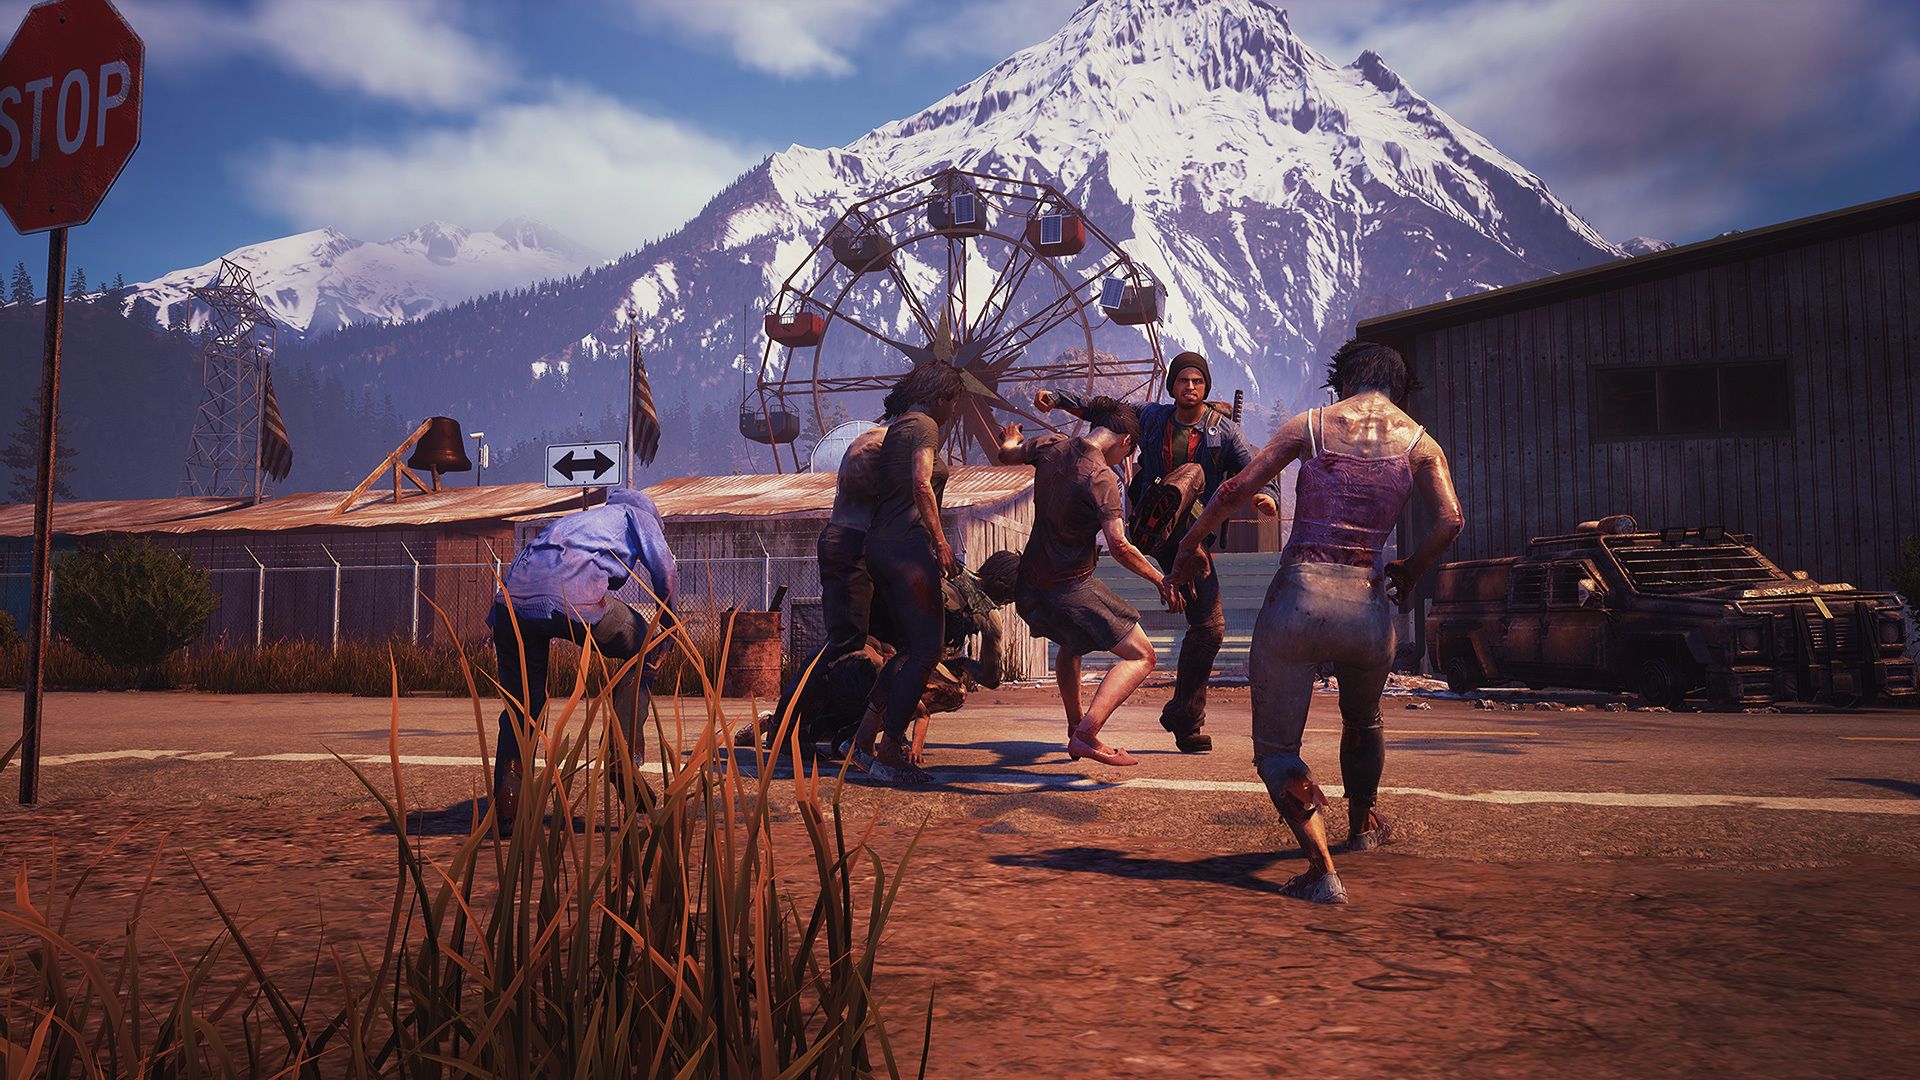 State of Decay 3 New Trailer 